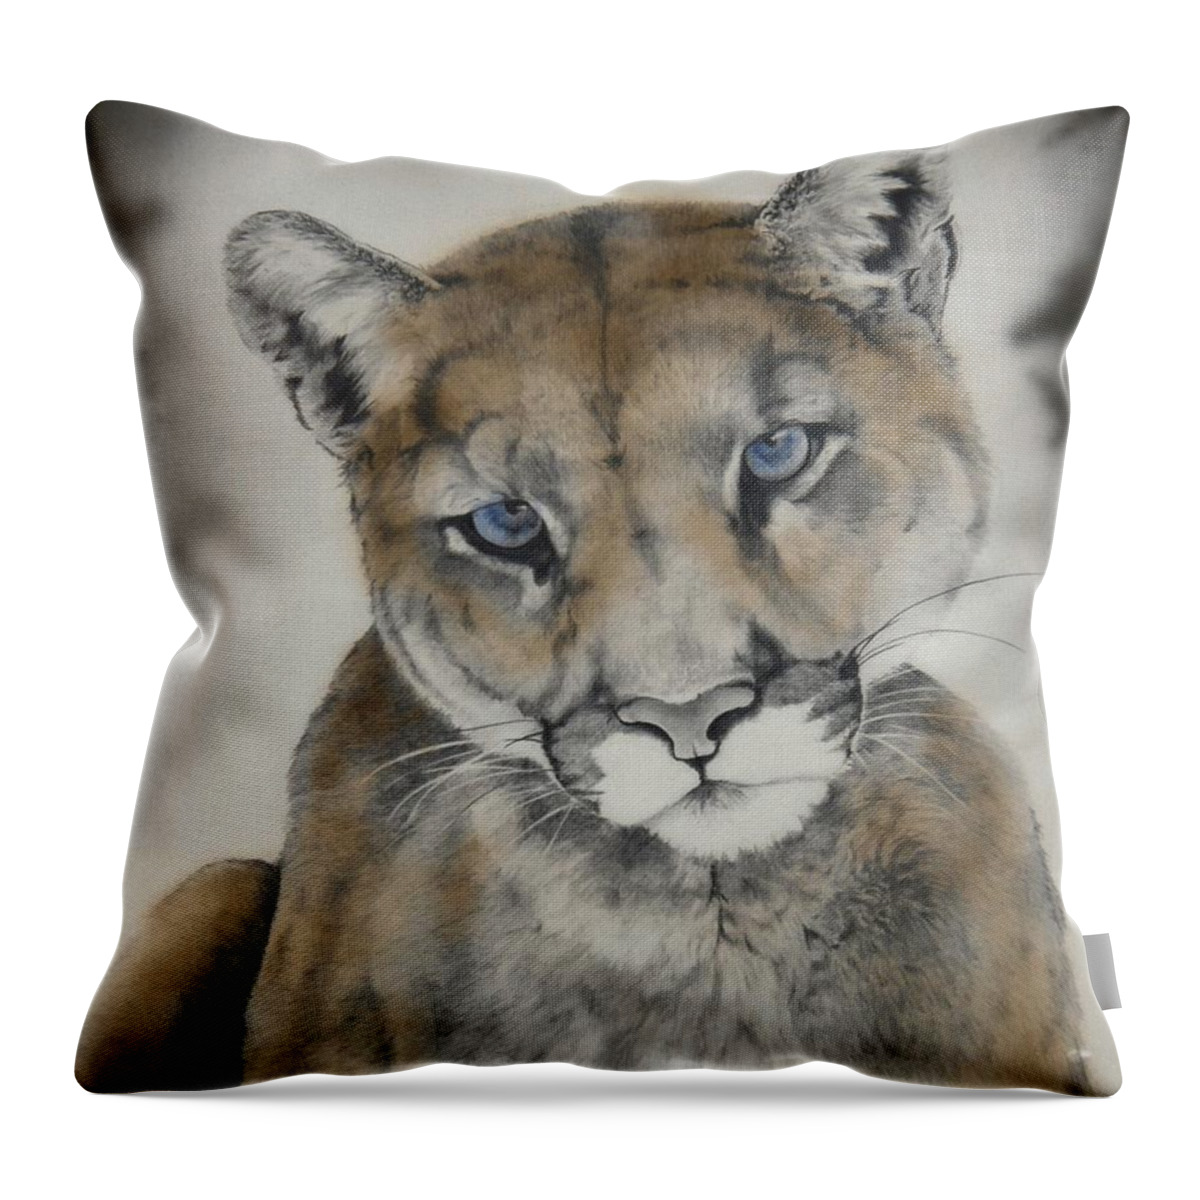 Cougar Throw Pillow featuring the painting Blue Eyes by Lori Brackett